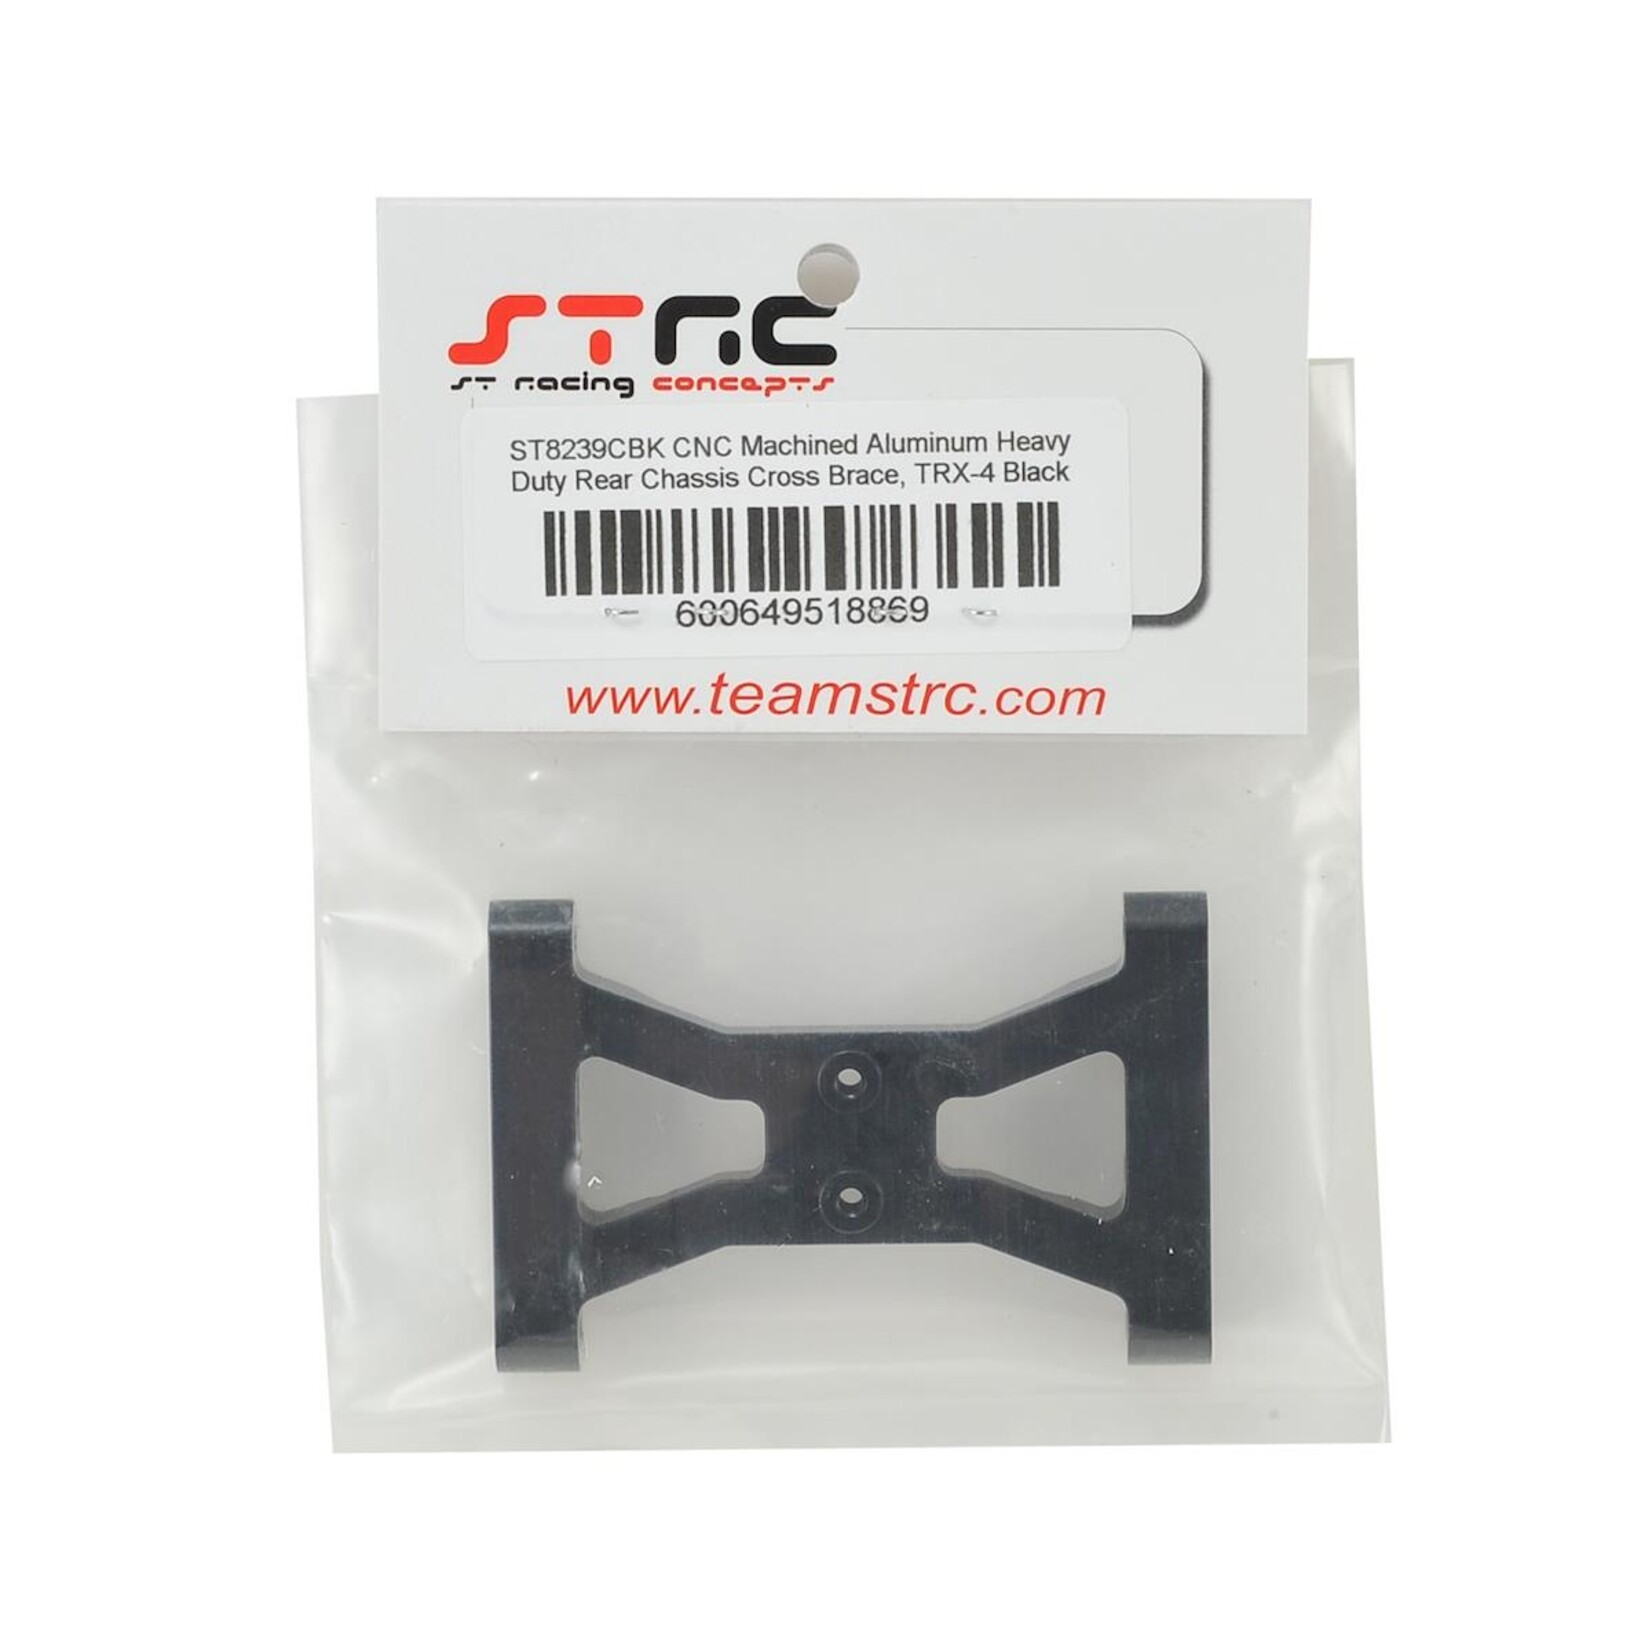 ST Racing Concepts ST Racing Concepts Traxxas TRX-4 HD Rear Chassis Cross Brace (Black) #ST8239CBK